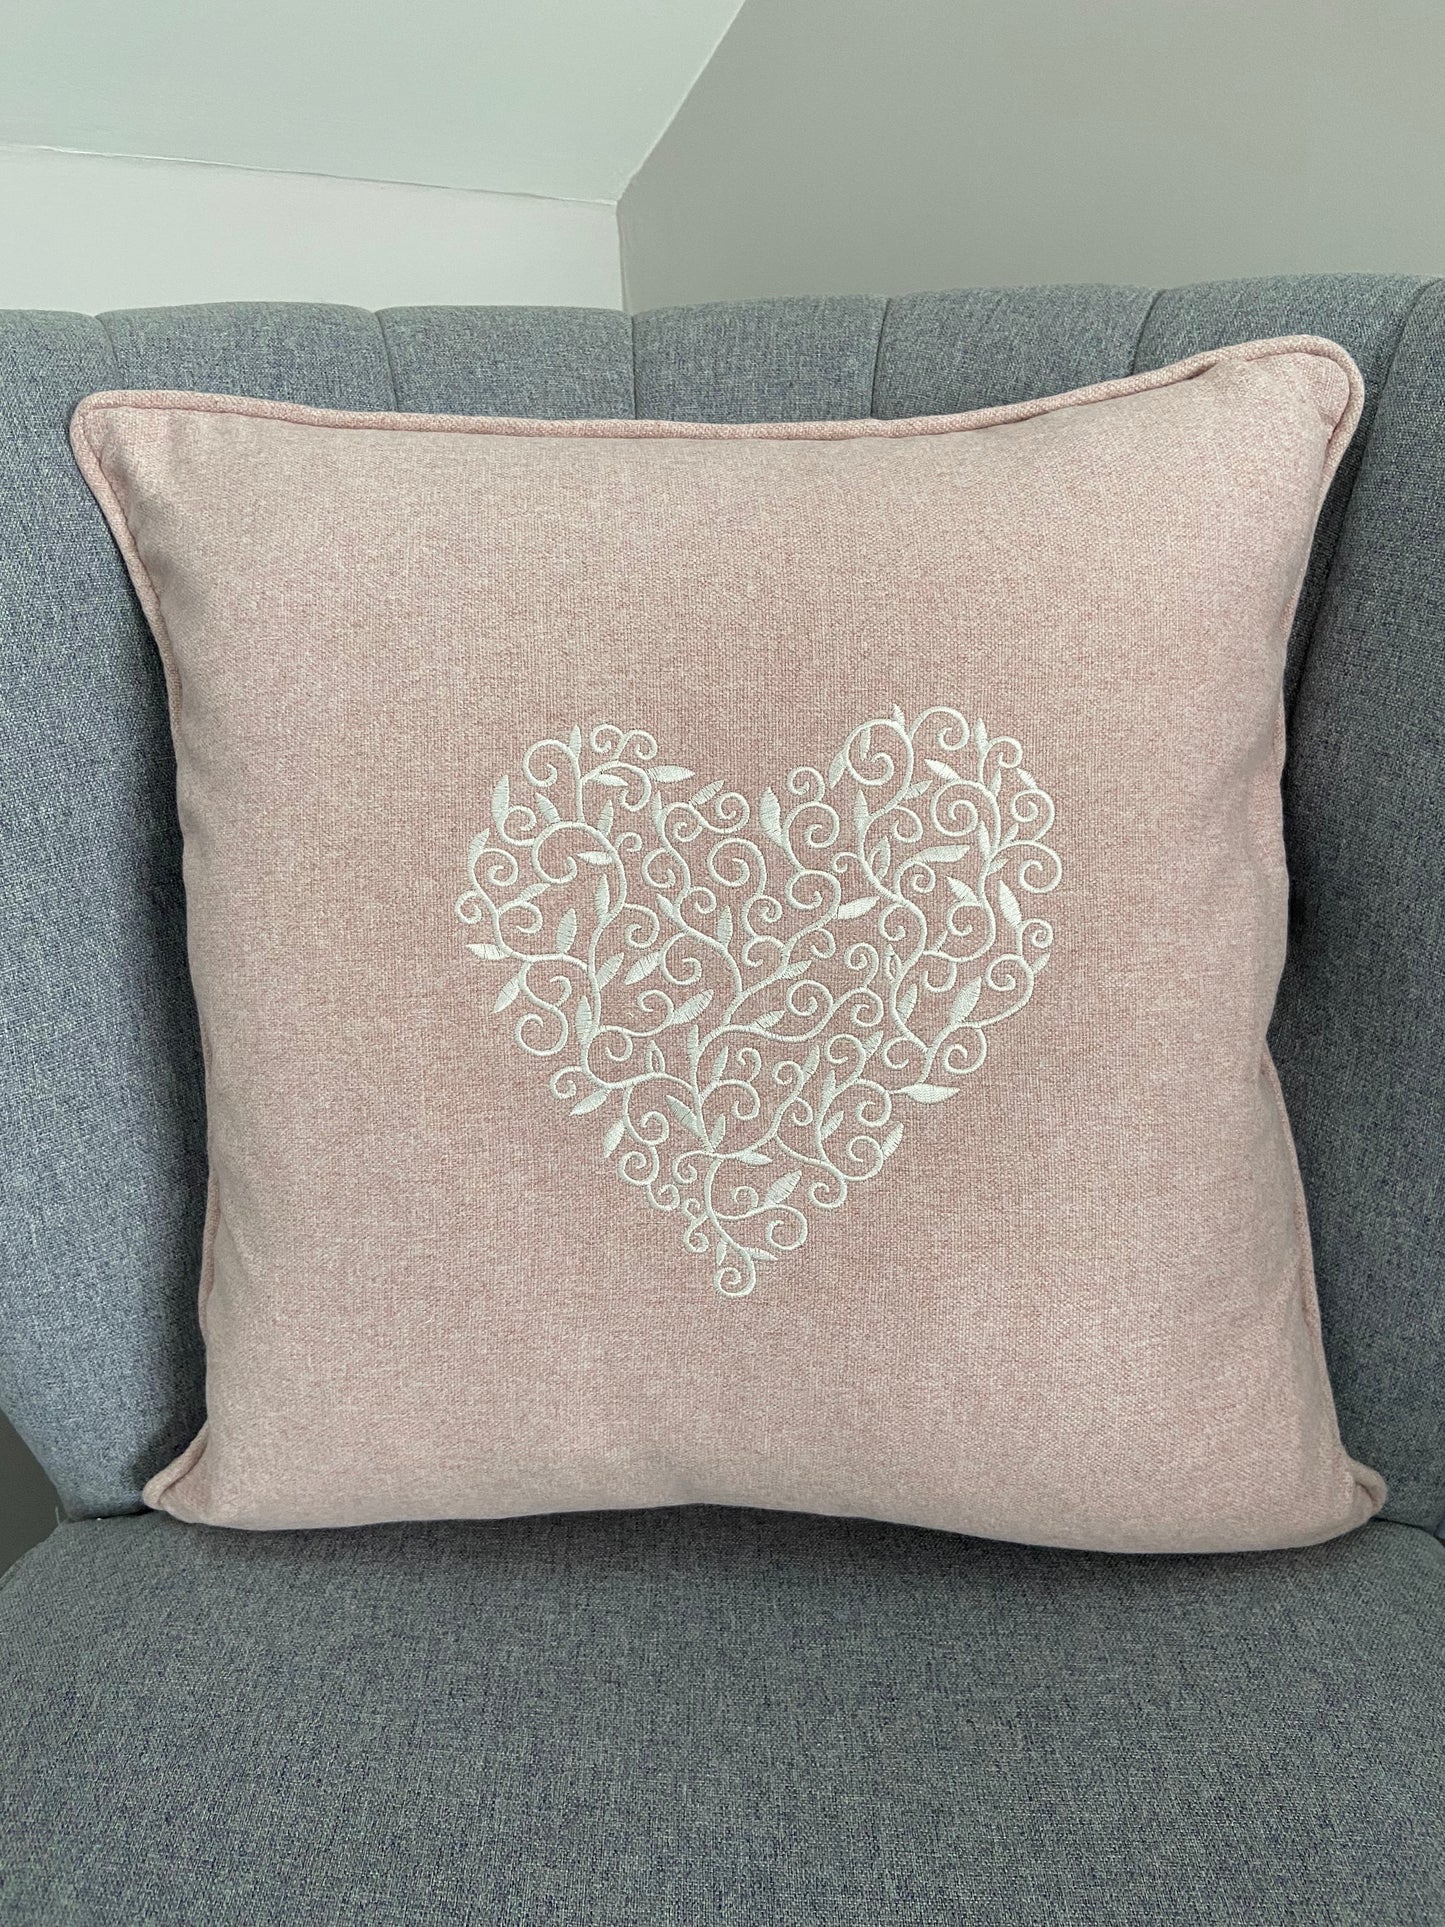 Detailed Heart Embroidered Cushion Cover - 45cm x 45cm